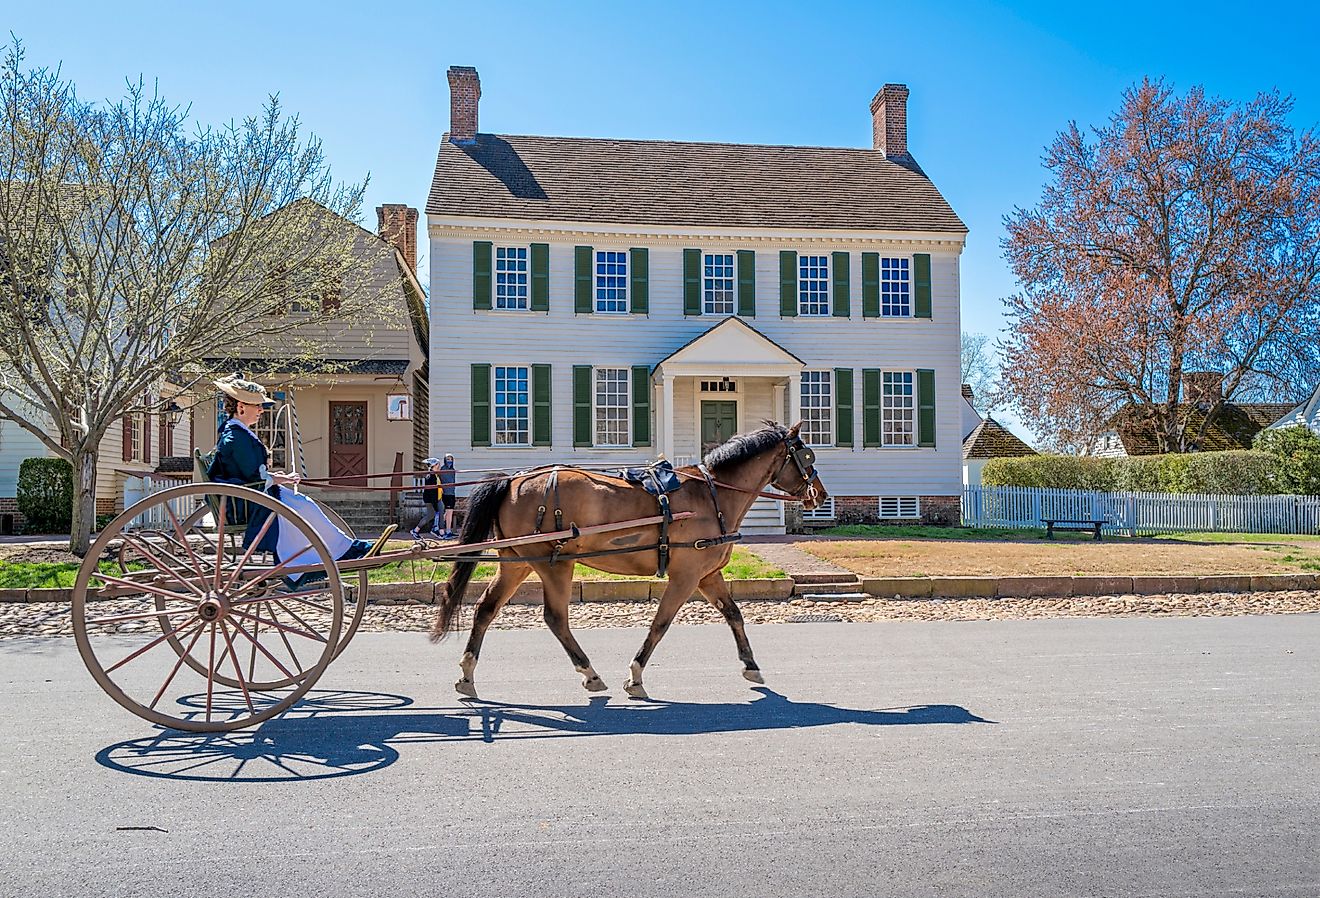 Woman riding on a horse and buggy in colonial Williamsburg, Virginia, at the end of winter.